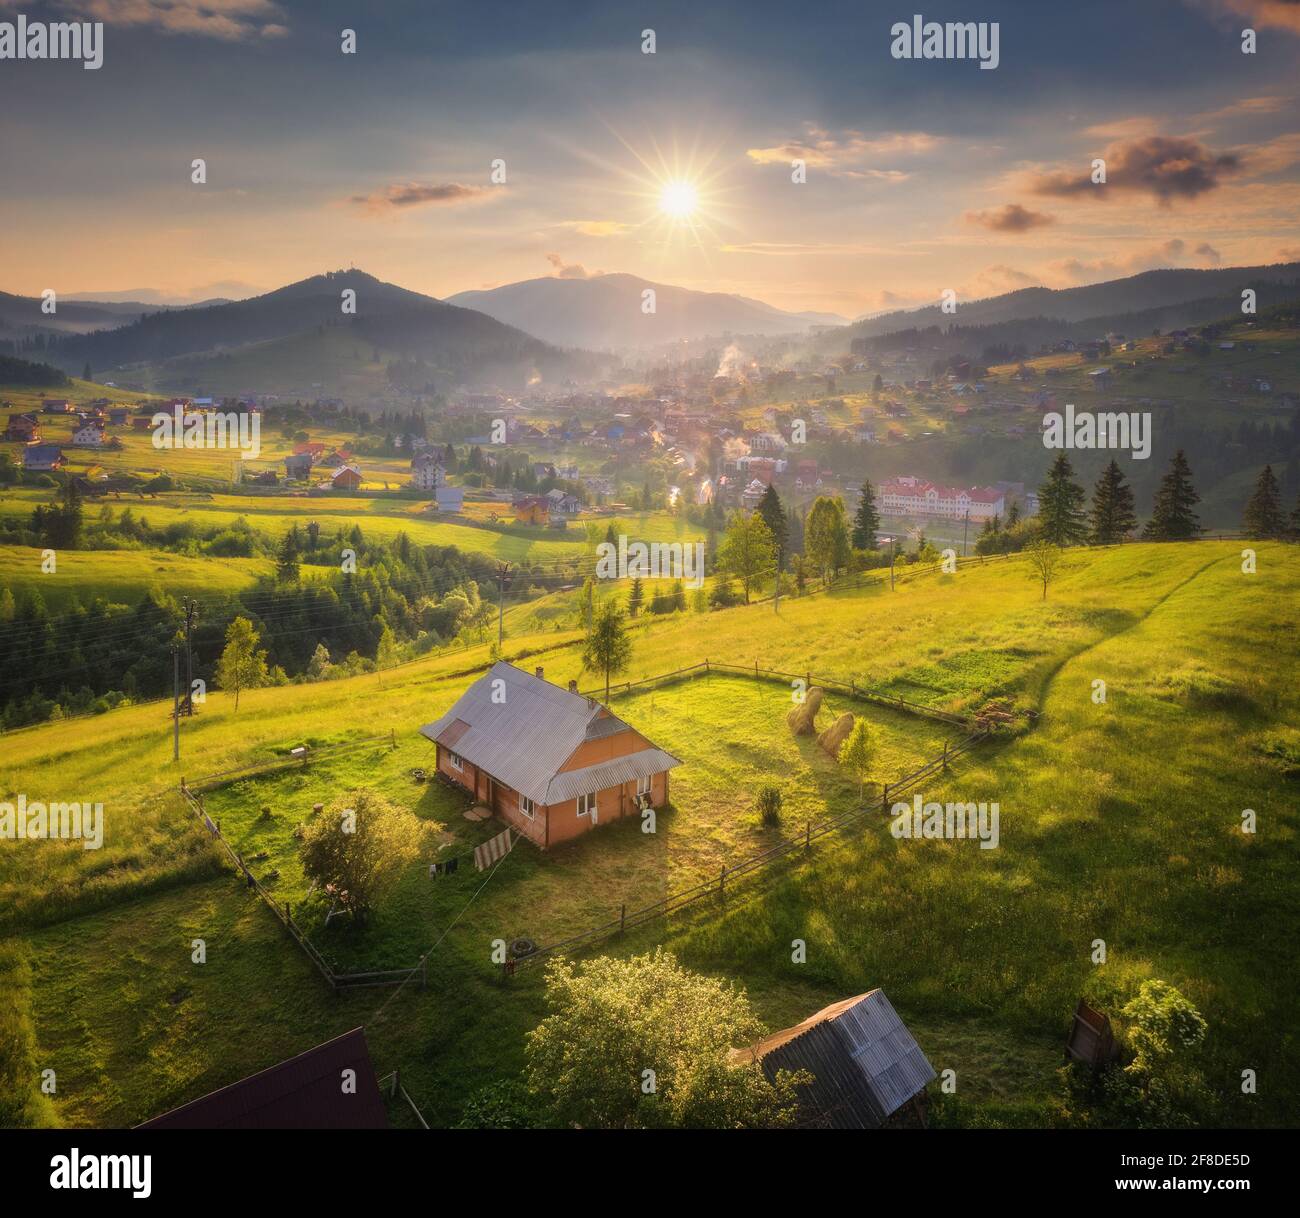 Aerial view of beautiful village in Carpathian mountains at sunset in summer. Colorful landscape with green meadows, houses with gardens, trees, sky w Stock Photo